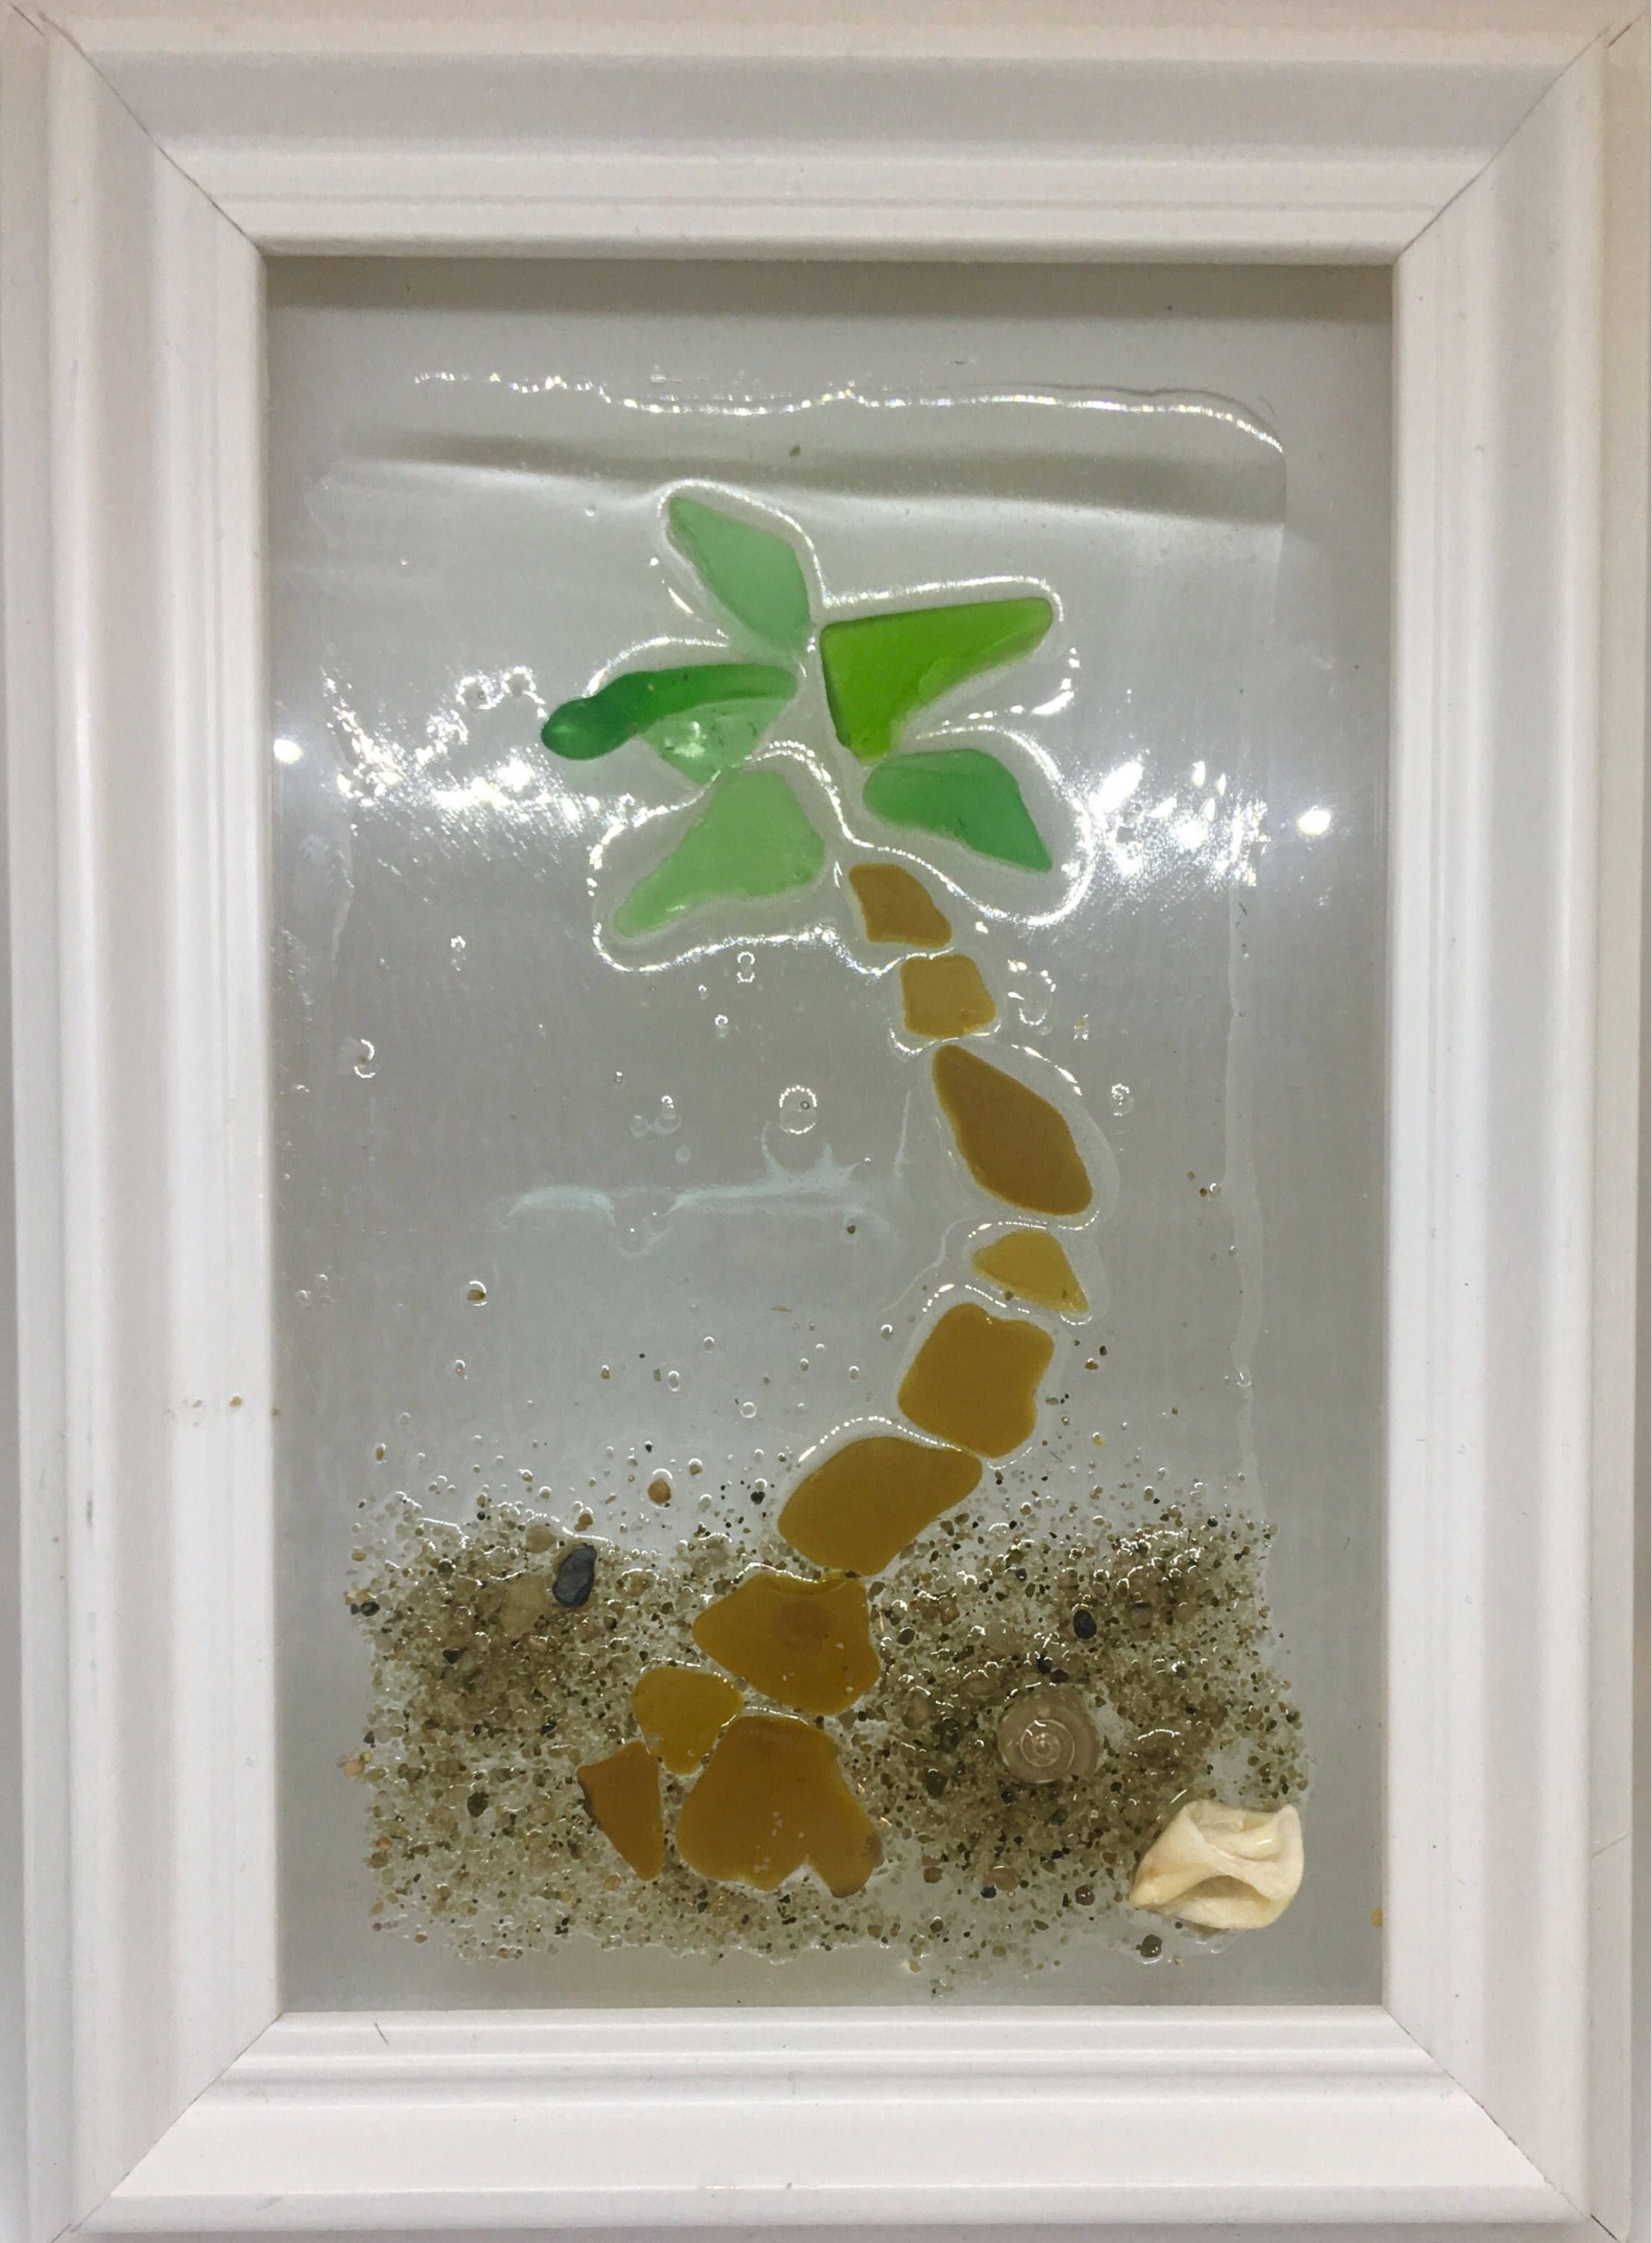 Sea Glass Wall Art: Palm Tree Design Made From Genuine Sea Glass 4x6 Pertaining To Newest Sea Glass Wall Art (View 2 of 15)